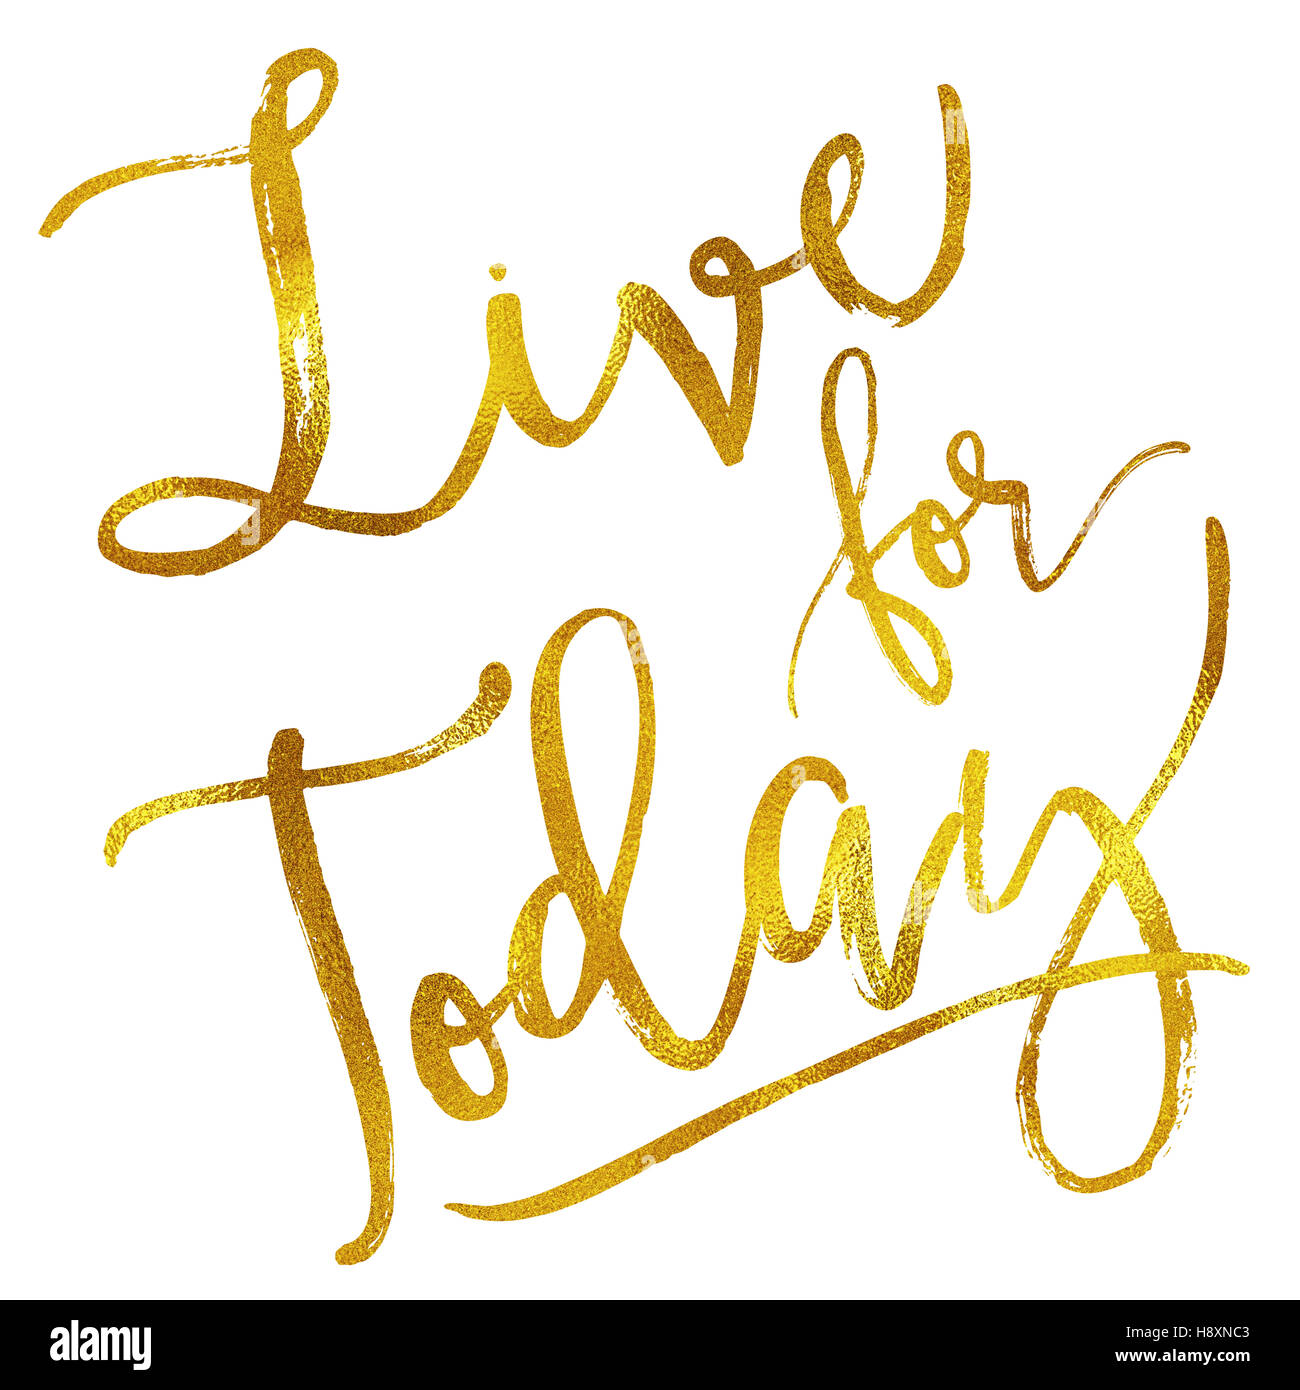 Live for Today Gold Faux Foil Metallic Inspirational Quote Isolated Stock Photo